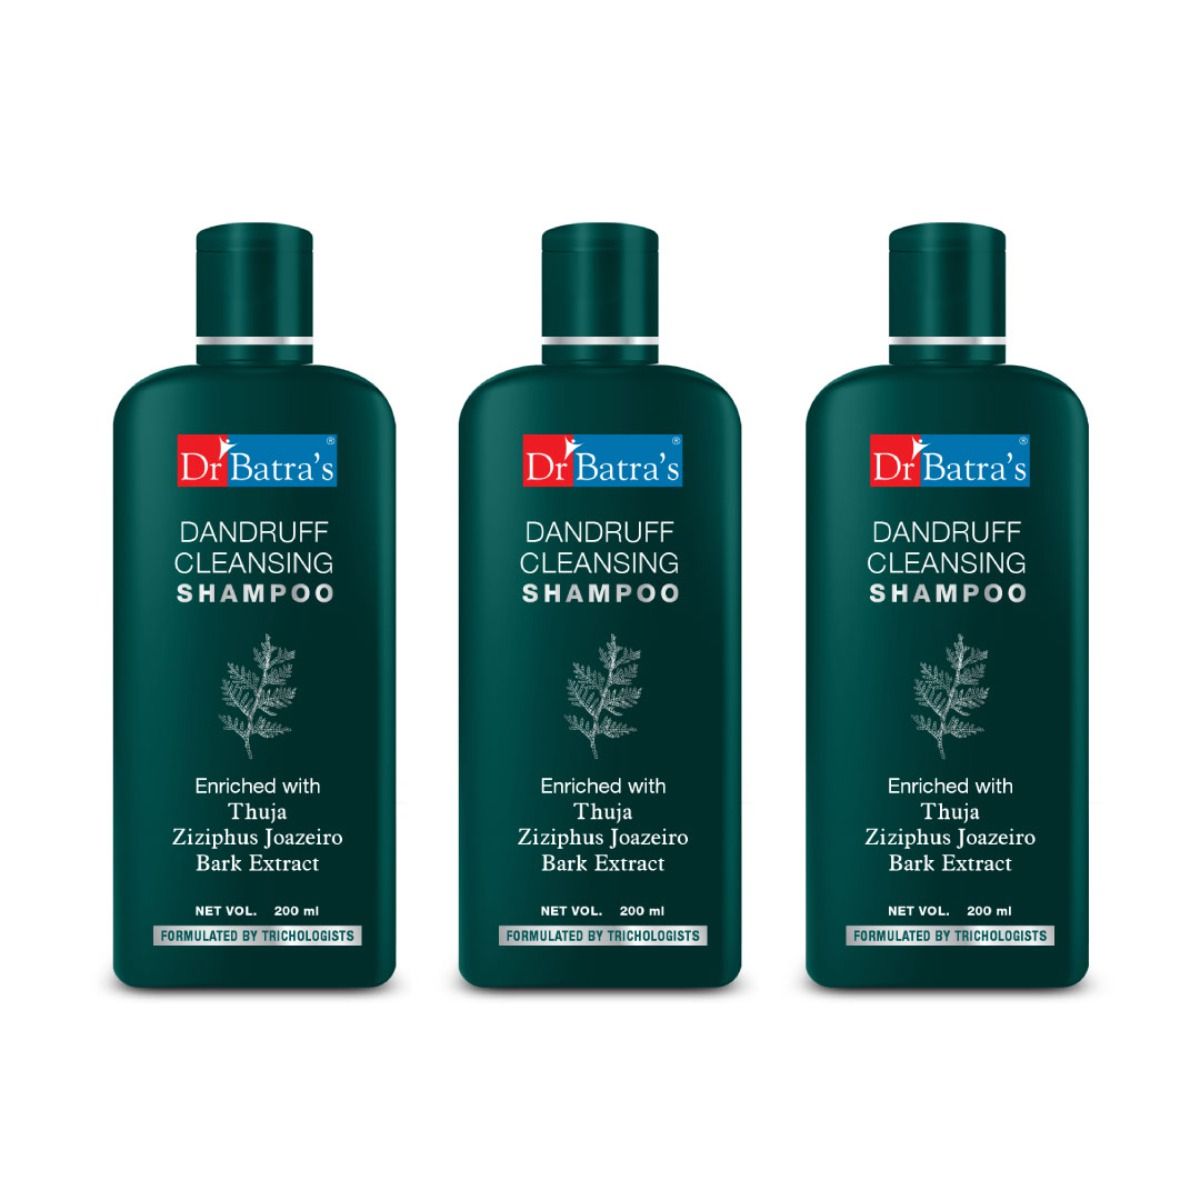     			Dr Batra's Dandruff Cleansing Shampoo Enriched With Thuja - 200 ml (Pack of 3)